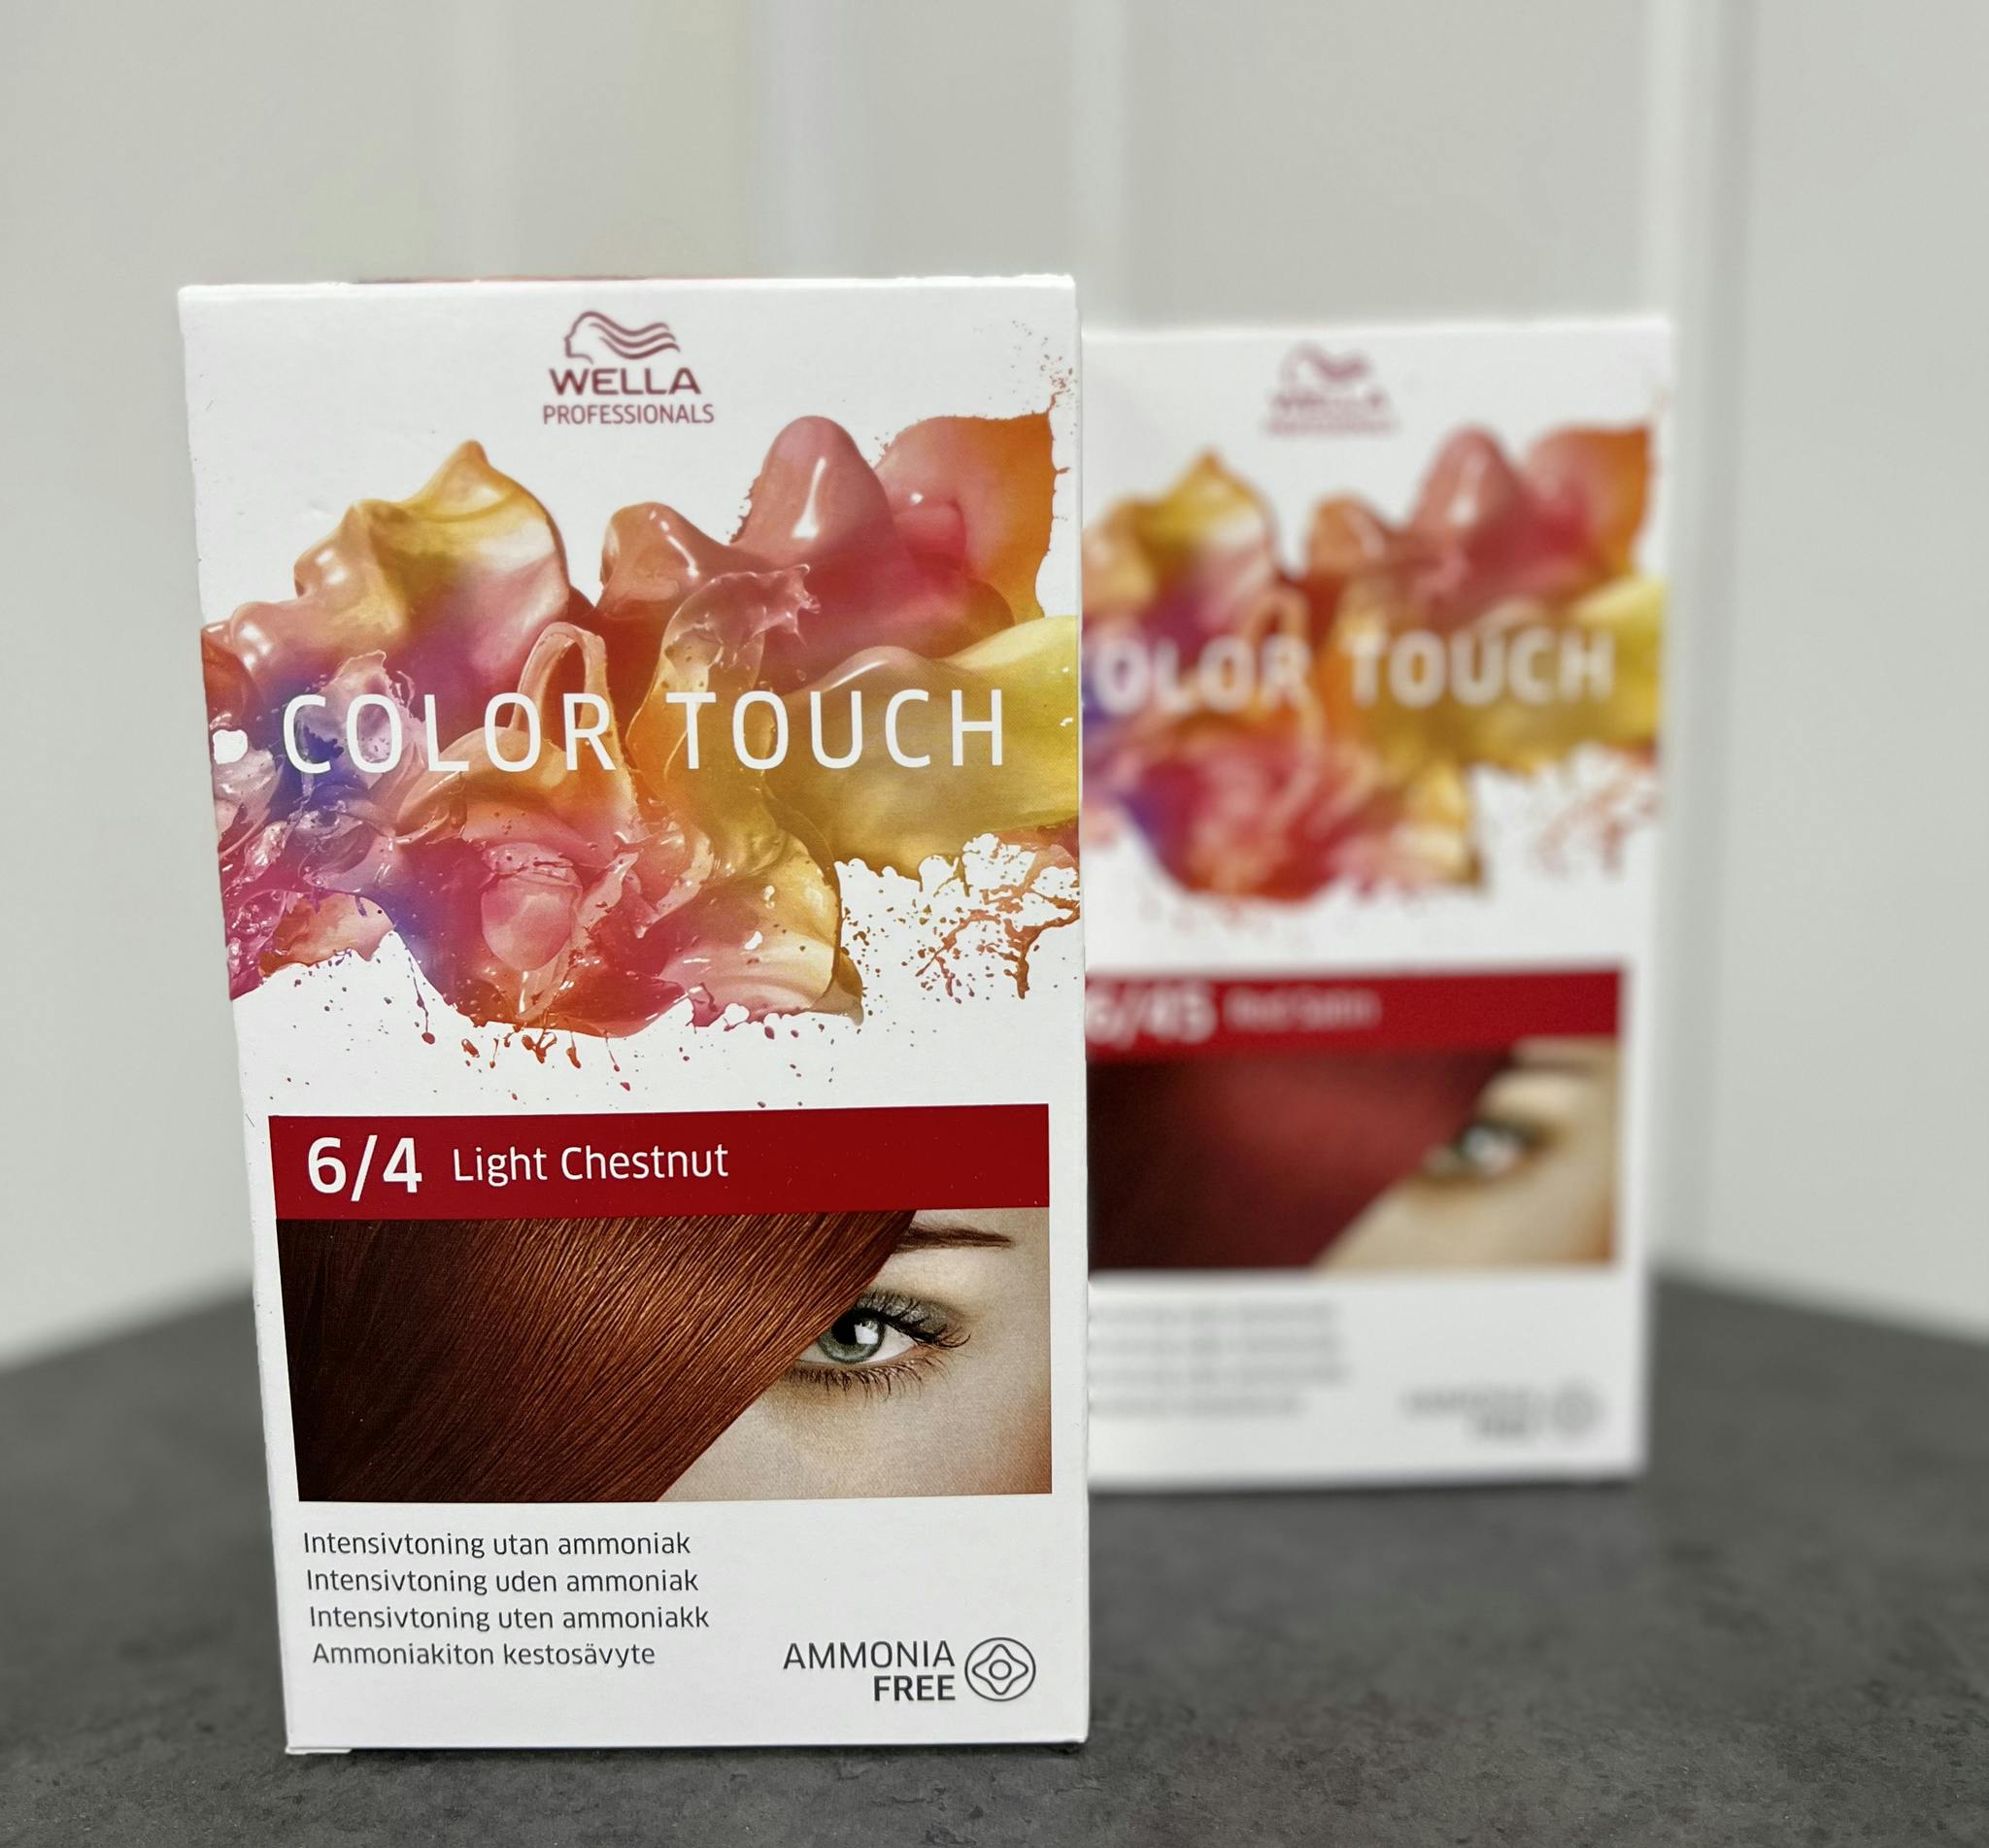 Wella Color Touch 66/45